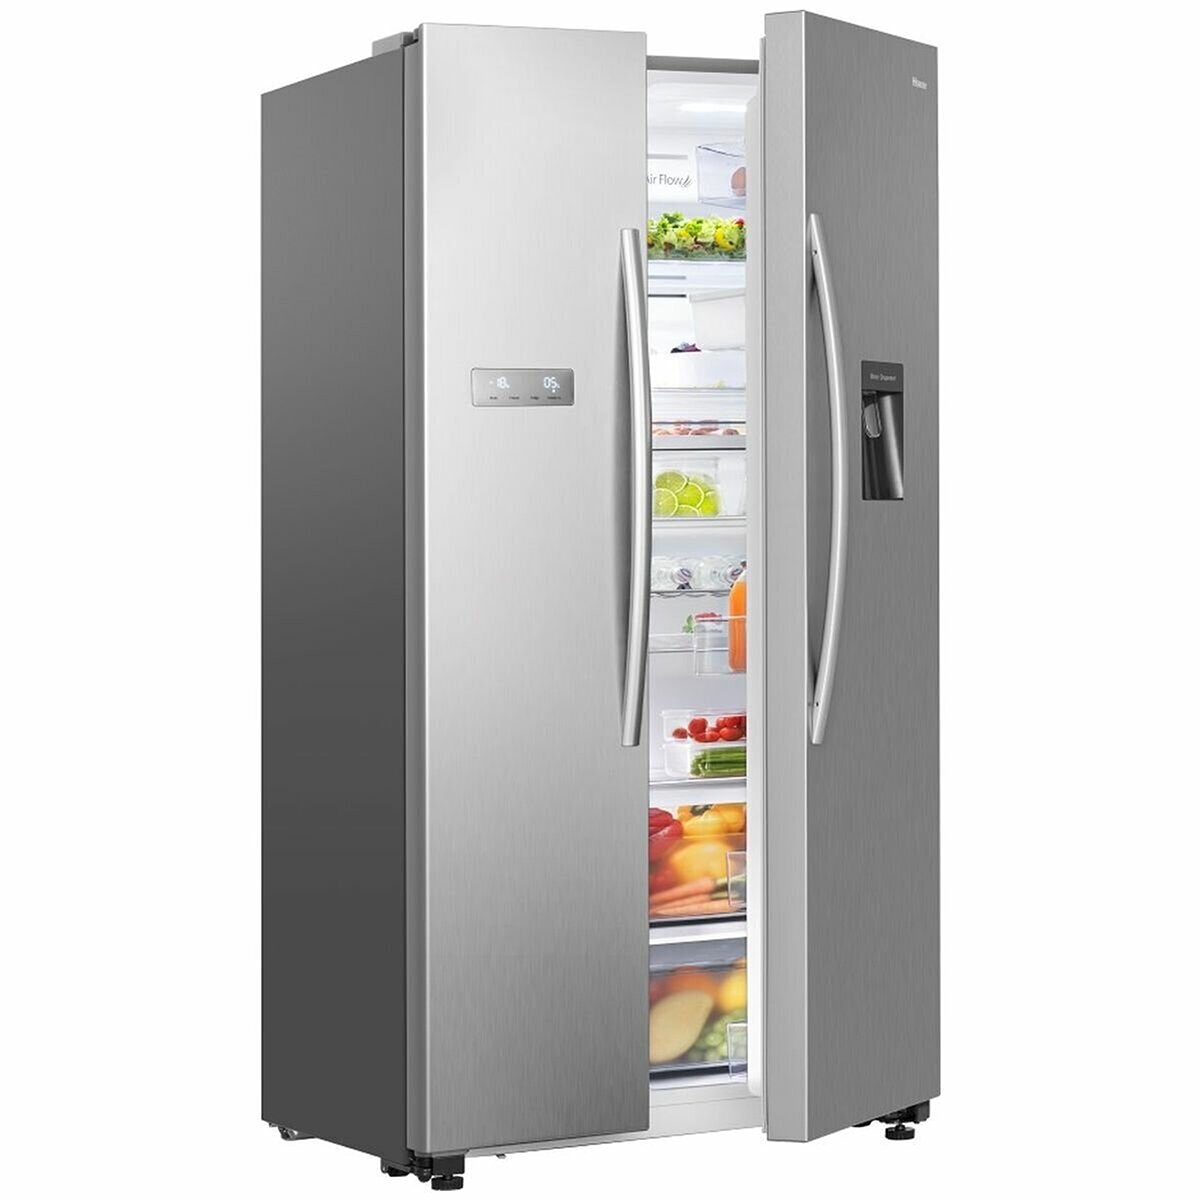 Hisense 578L Side By Side Refrigerator Stainless HRSBS578SW